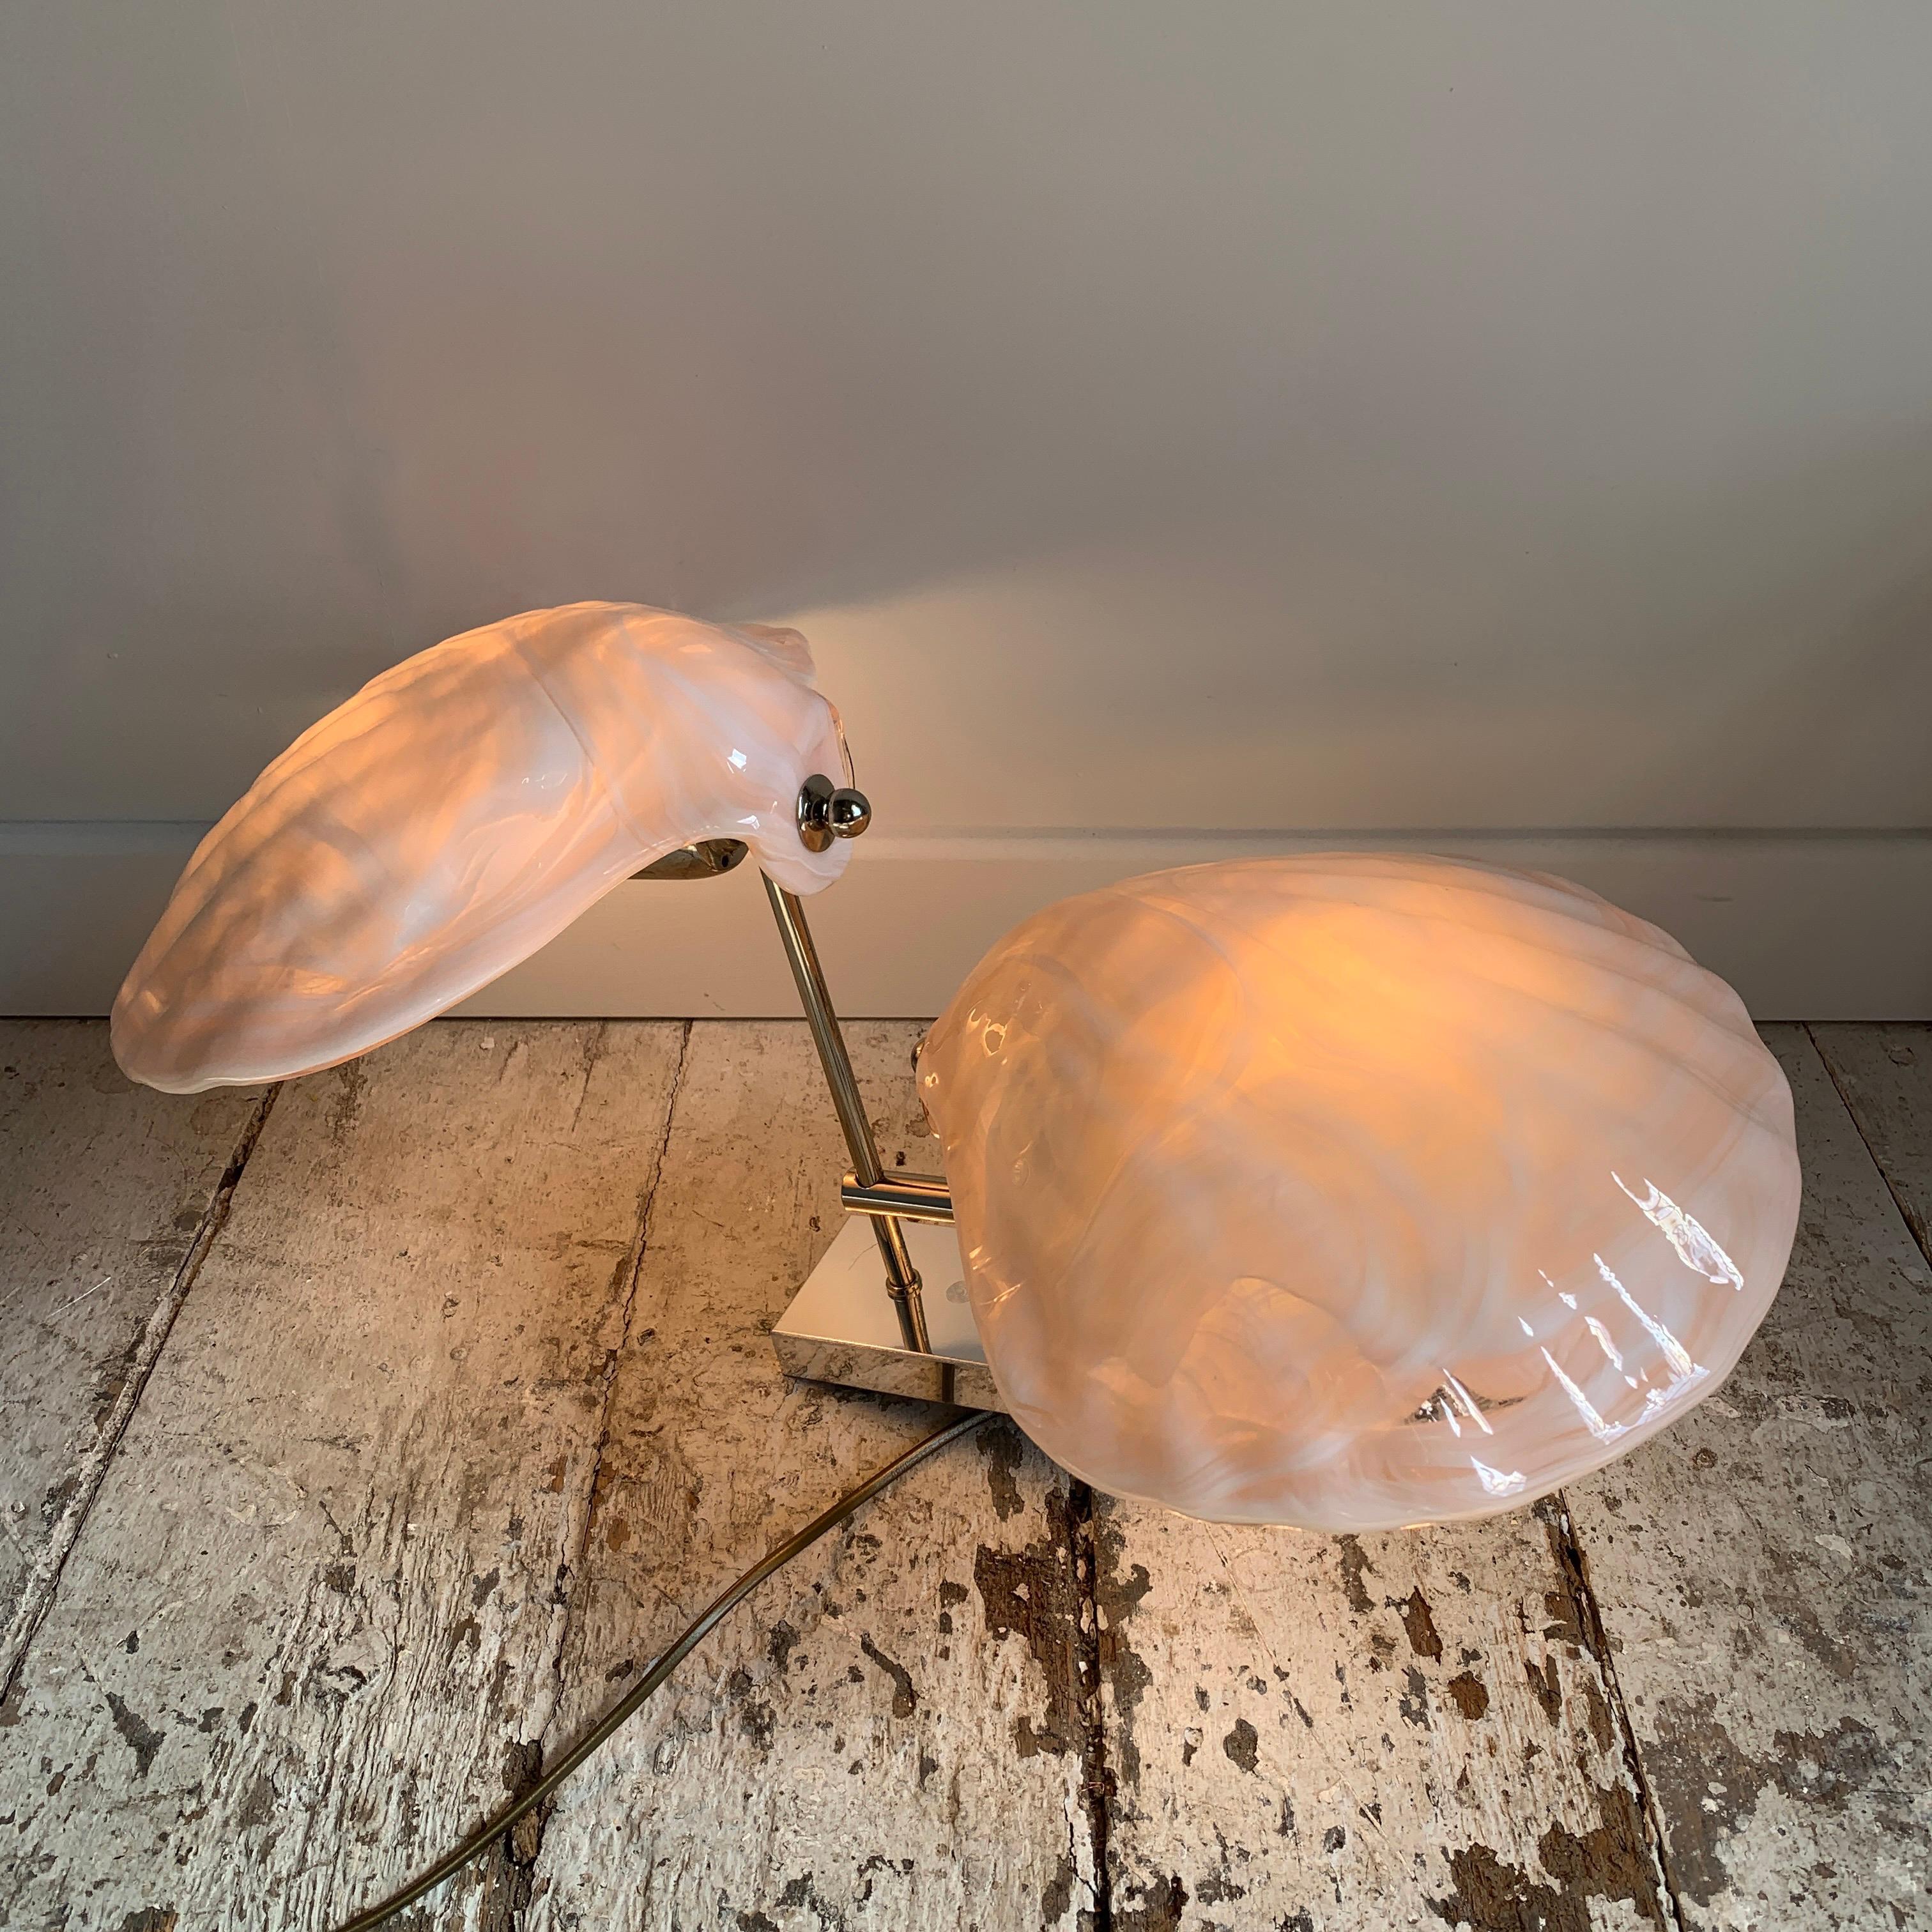 Exceptional La Murrina Egeo scallop shell Murano glass ceiling light, Italy late 70's/80's
In stunning Opaque Rosa Murano glass this scallop shell plafoniera is exceptional
In excellent original condition, no cracks or scratches to the glass
56cm